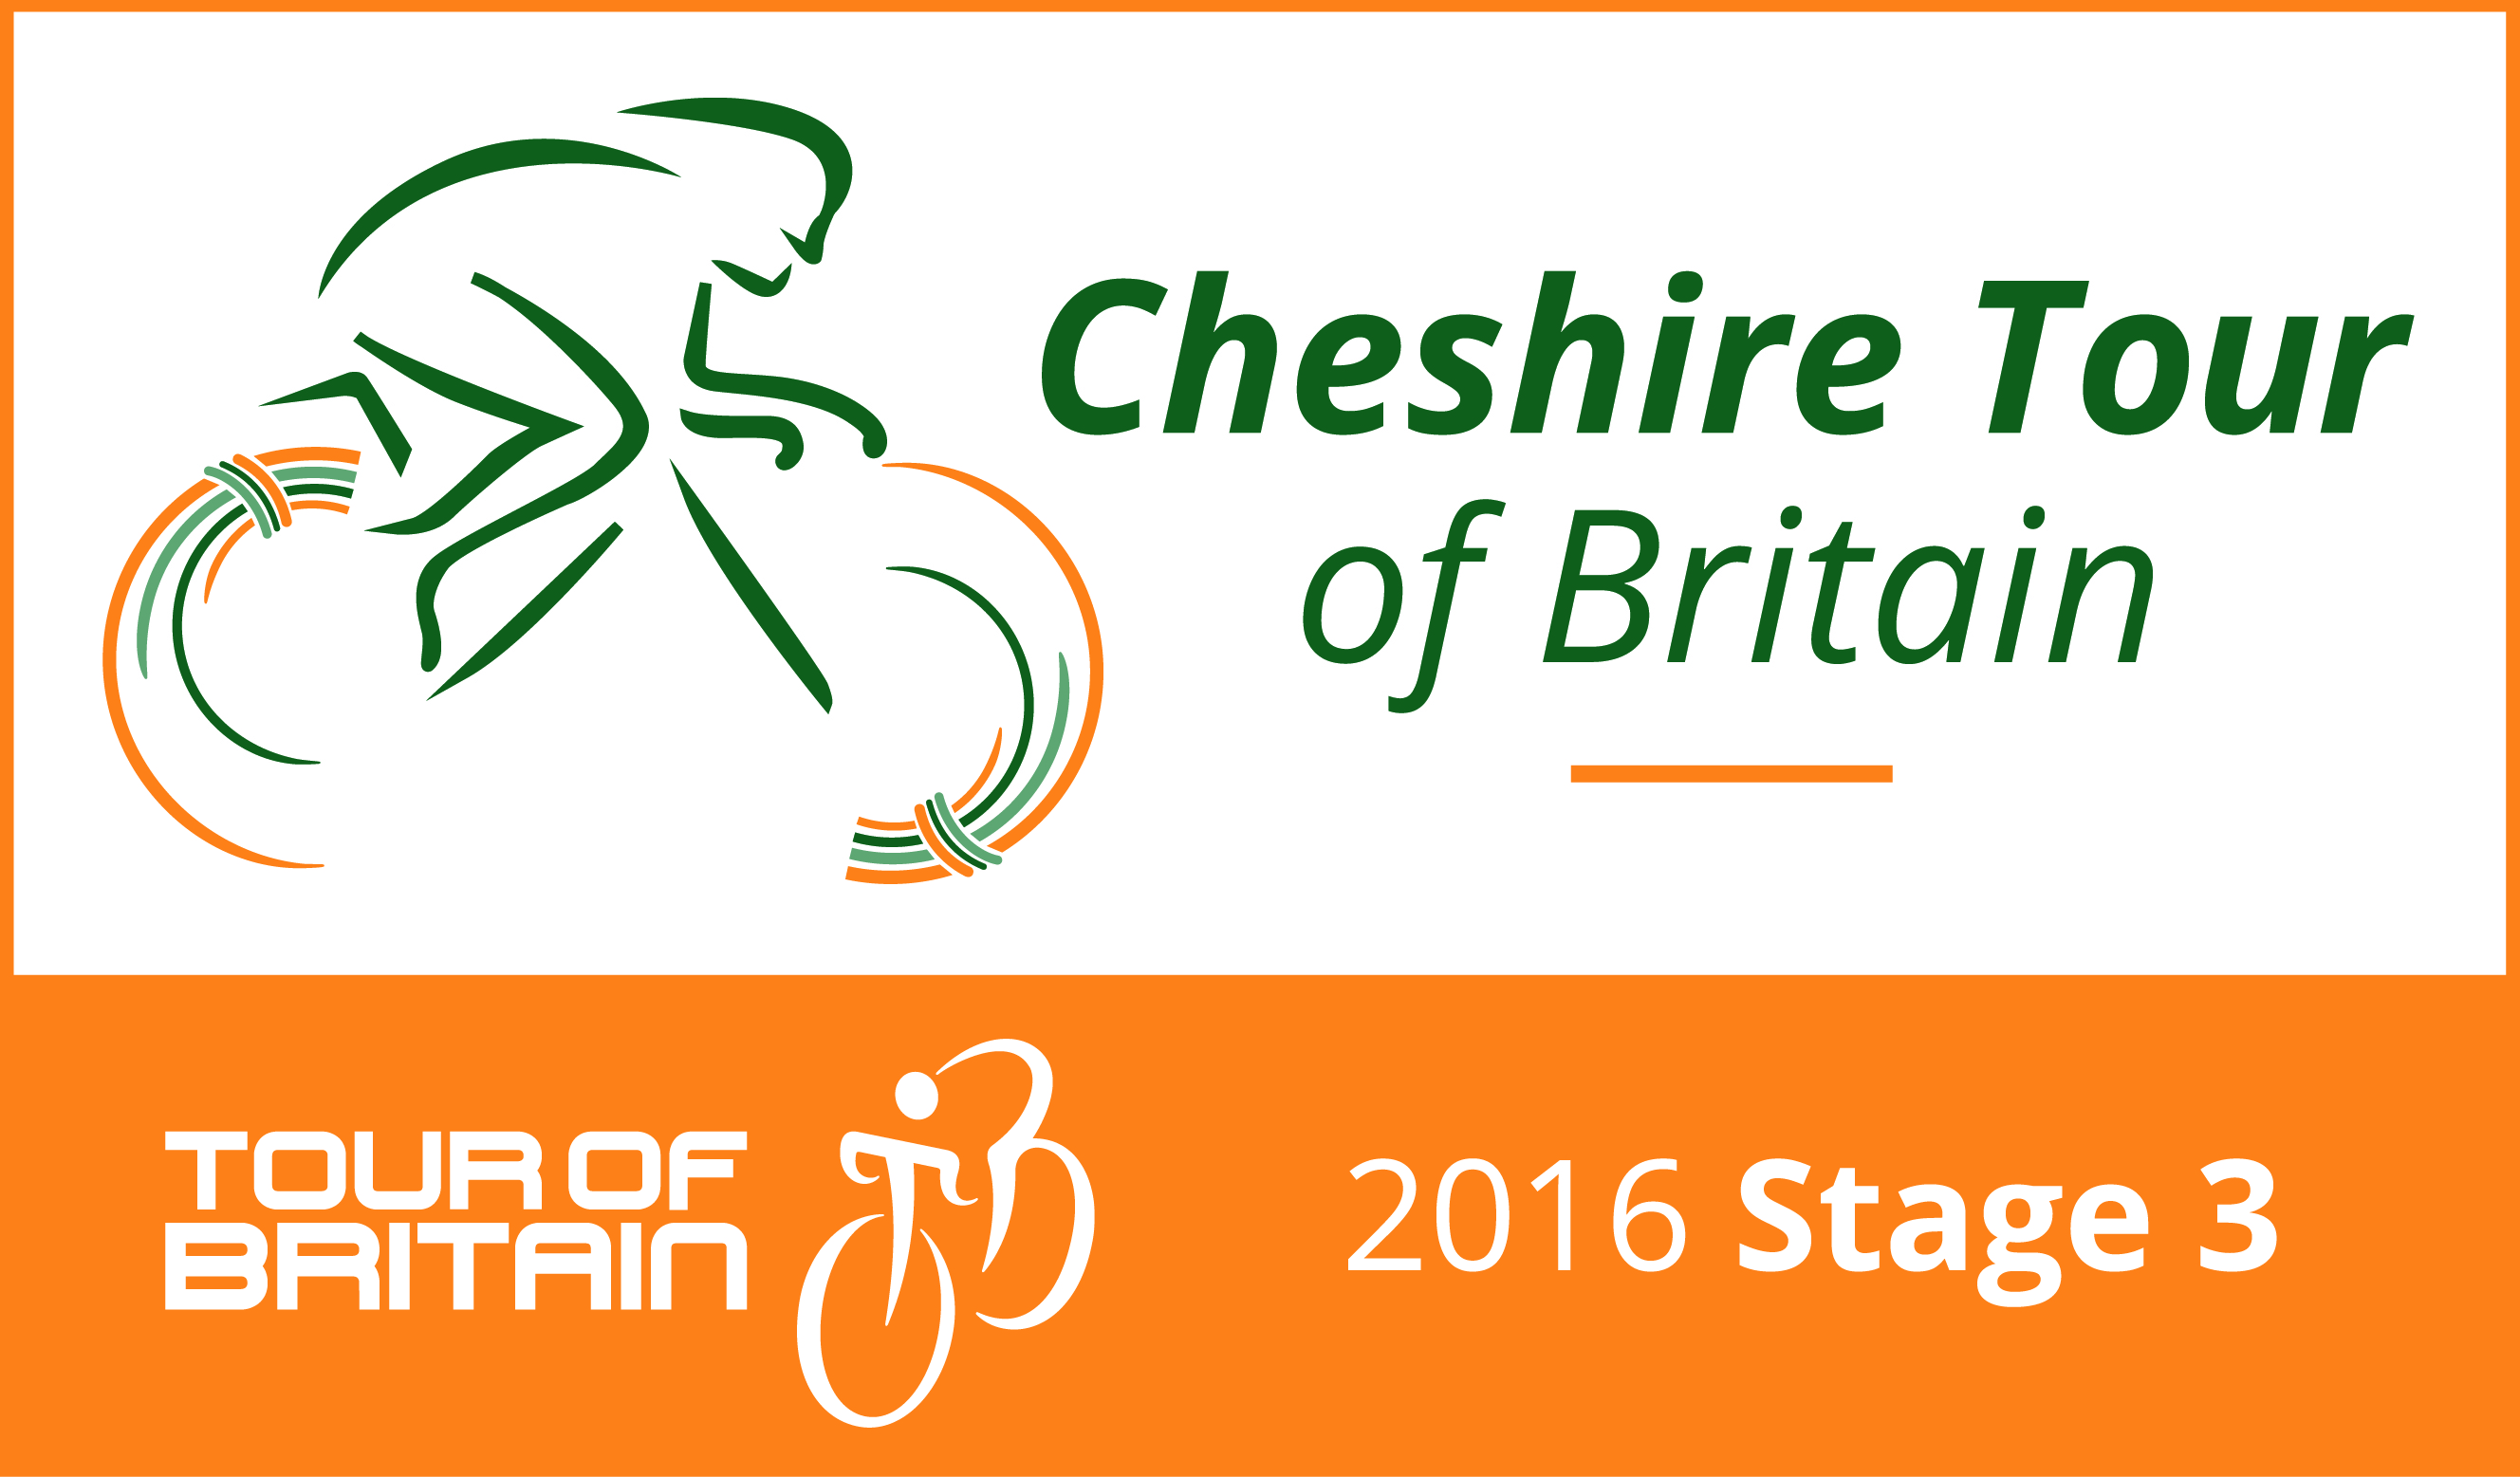 Celebrate Cheshire Tour of Britain with Everybody • Everybody Health